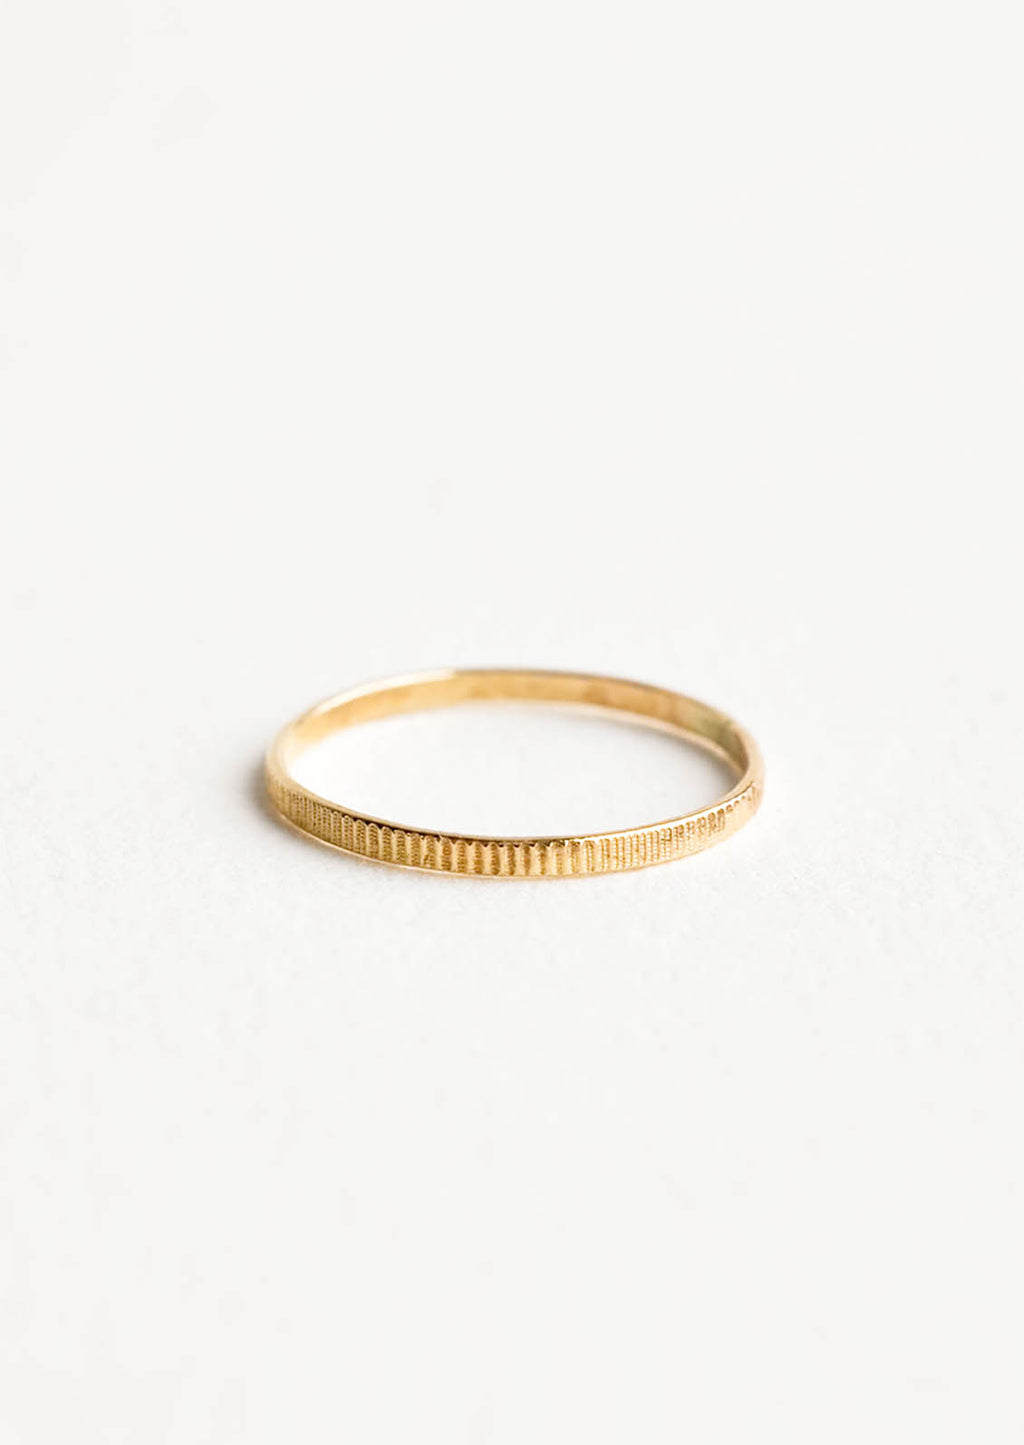 1: Yellow gold ring with etched decorative markings around the band. 